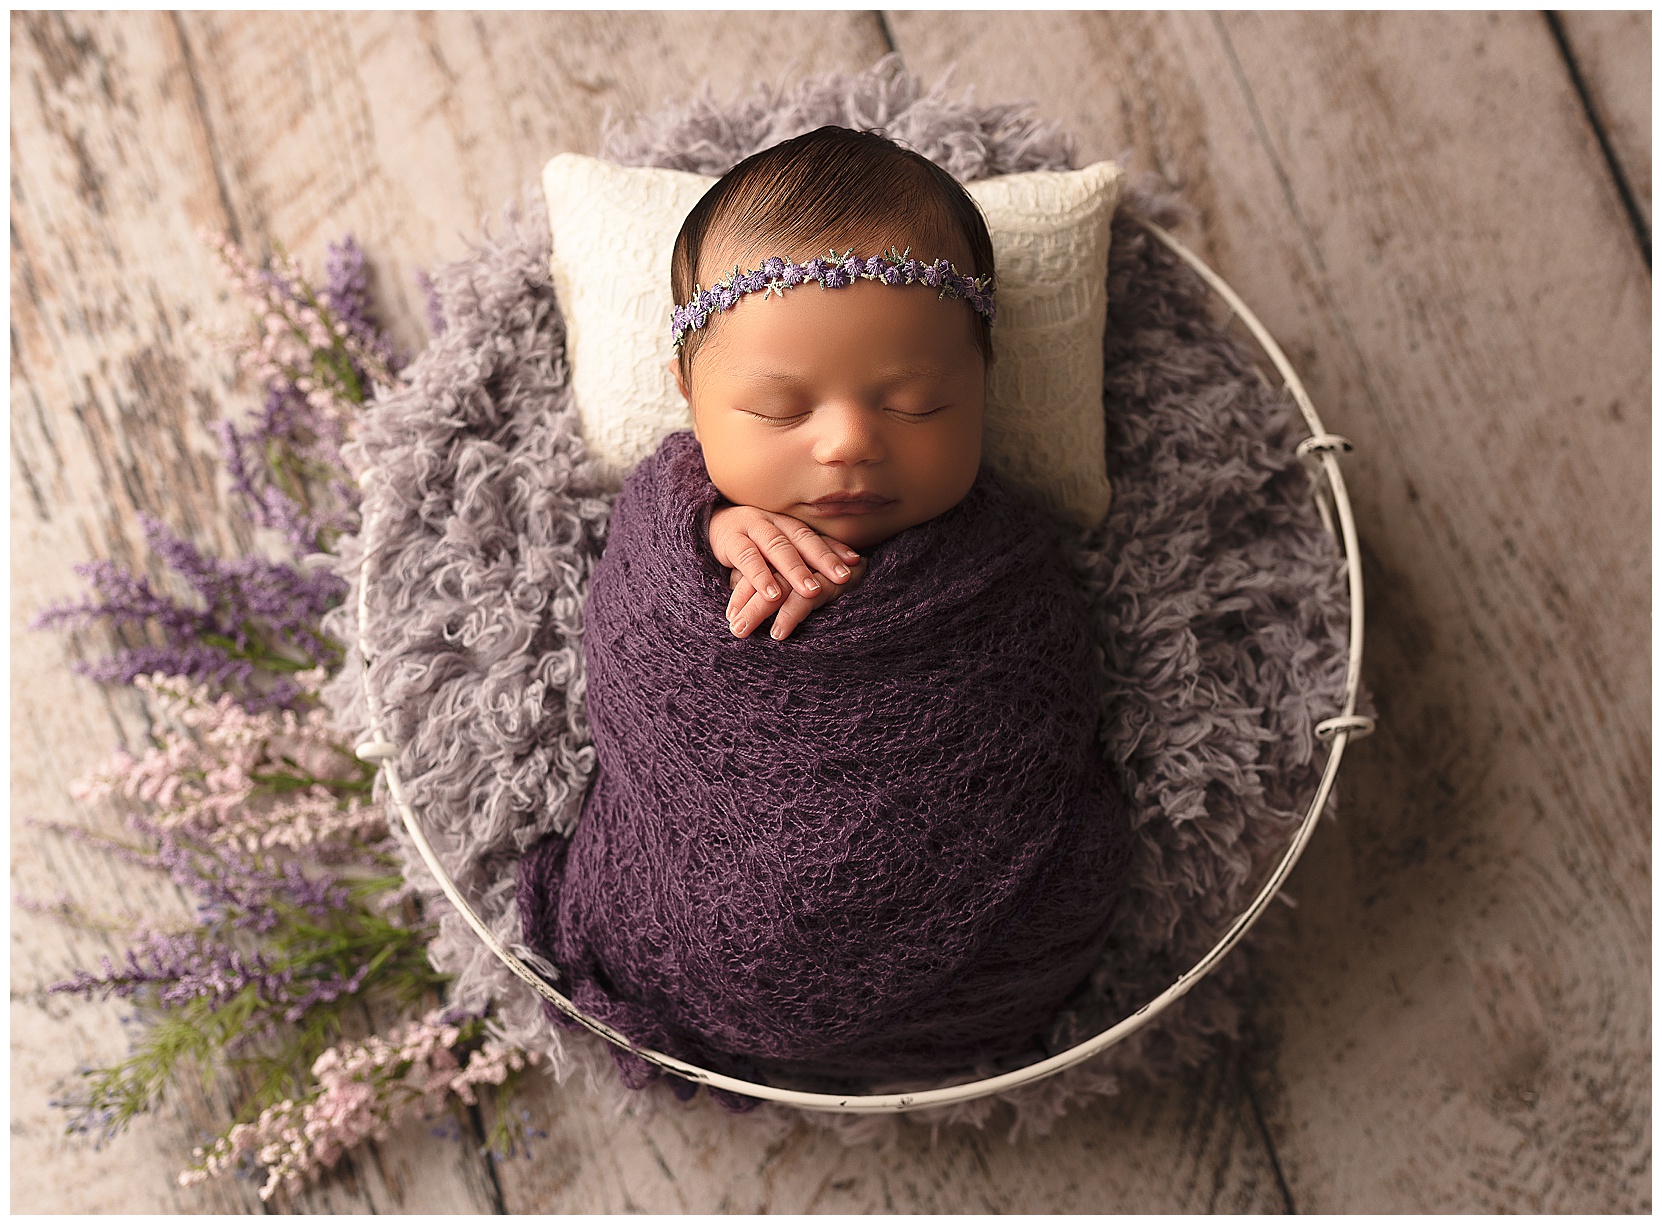 newborn baby girl with a purple wrap and purple headband in a white bowl